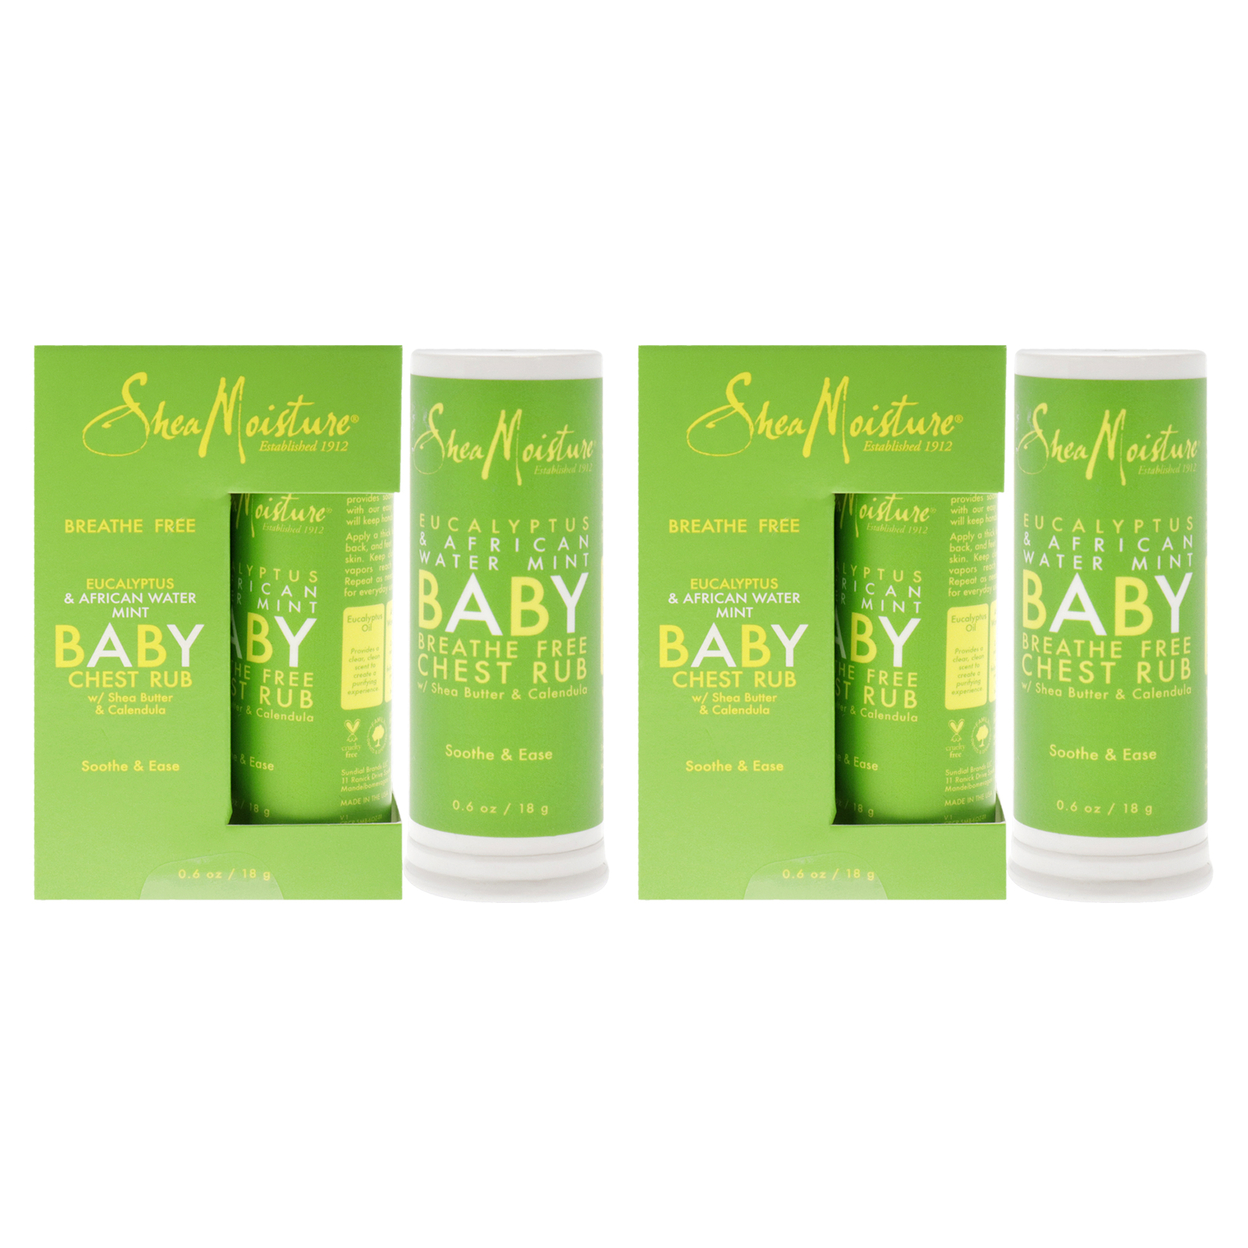 Shea Moisture Eucalyptus And African Water Mint Baby Chest Rub - Pack Of 2 Ointment 0.6 Oz